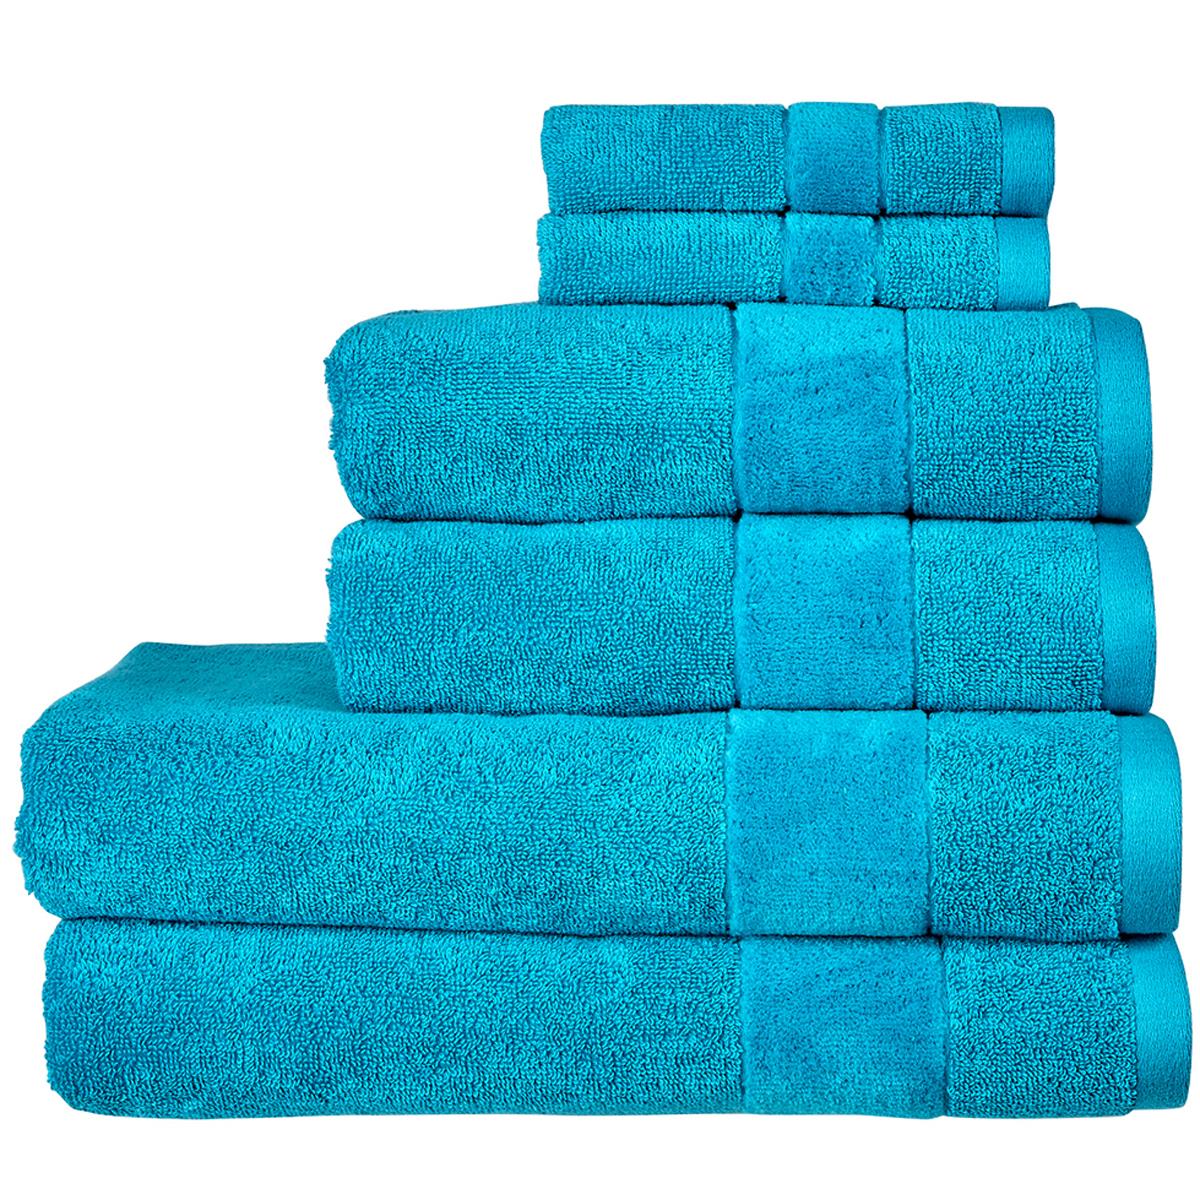 Christy Prism Towels Poolside Blue Questions & Answers